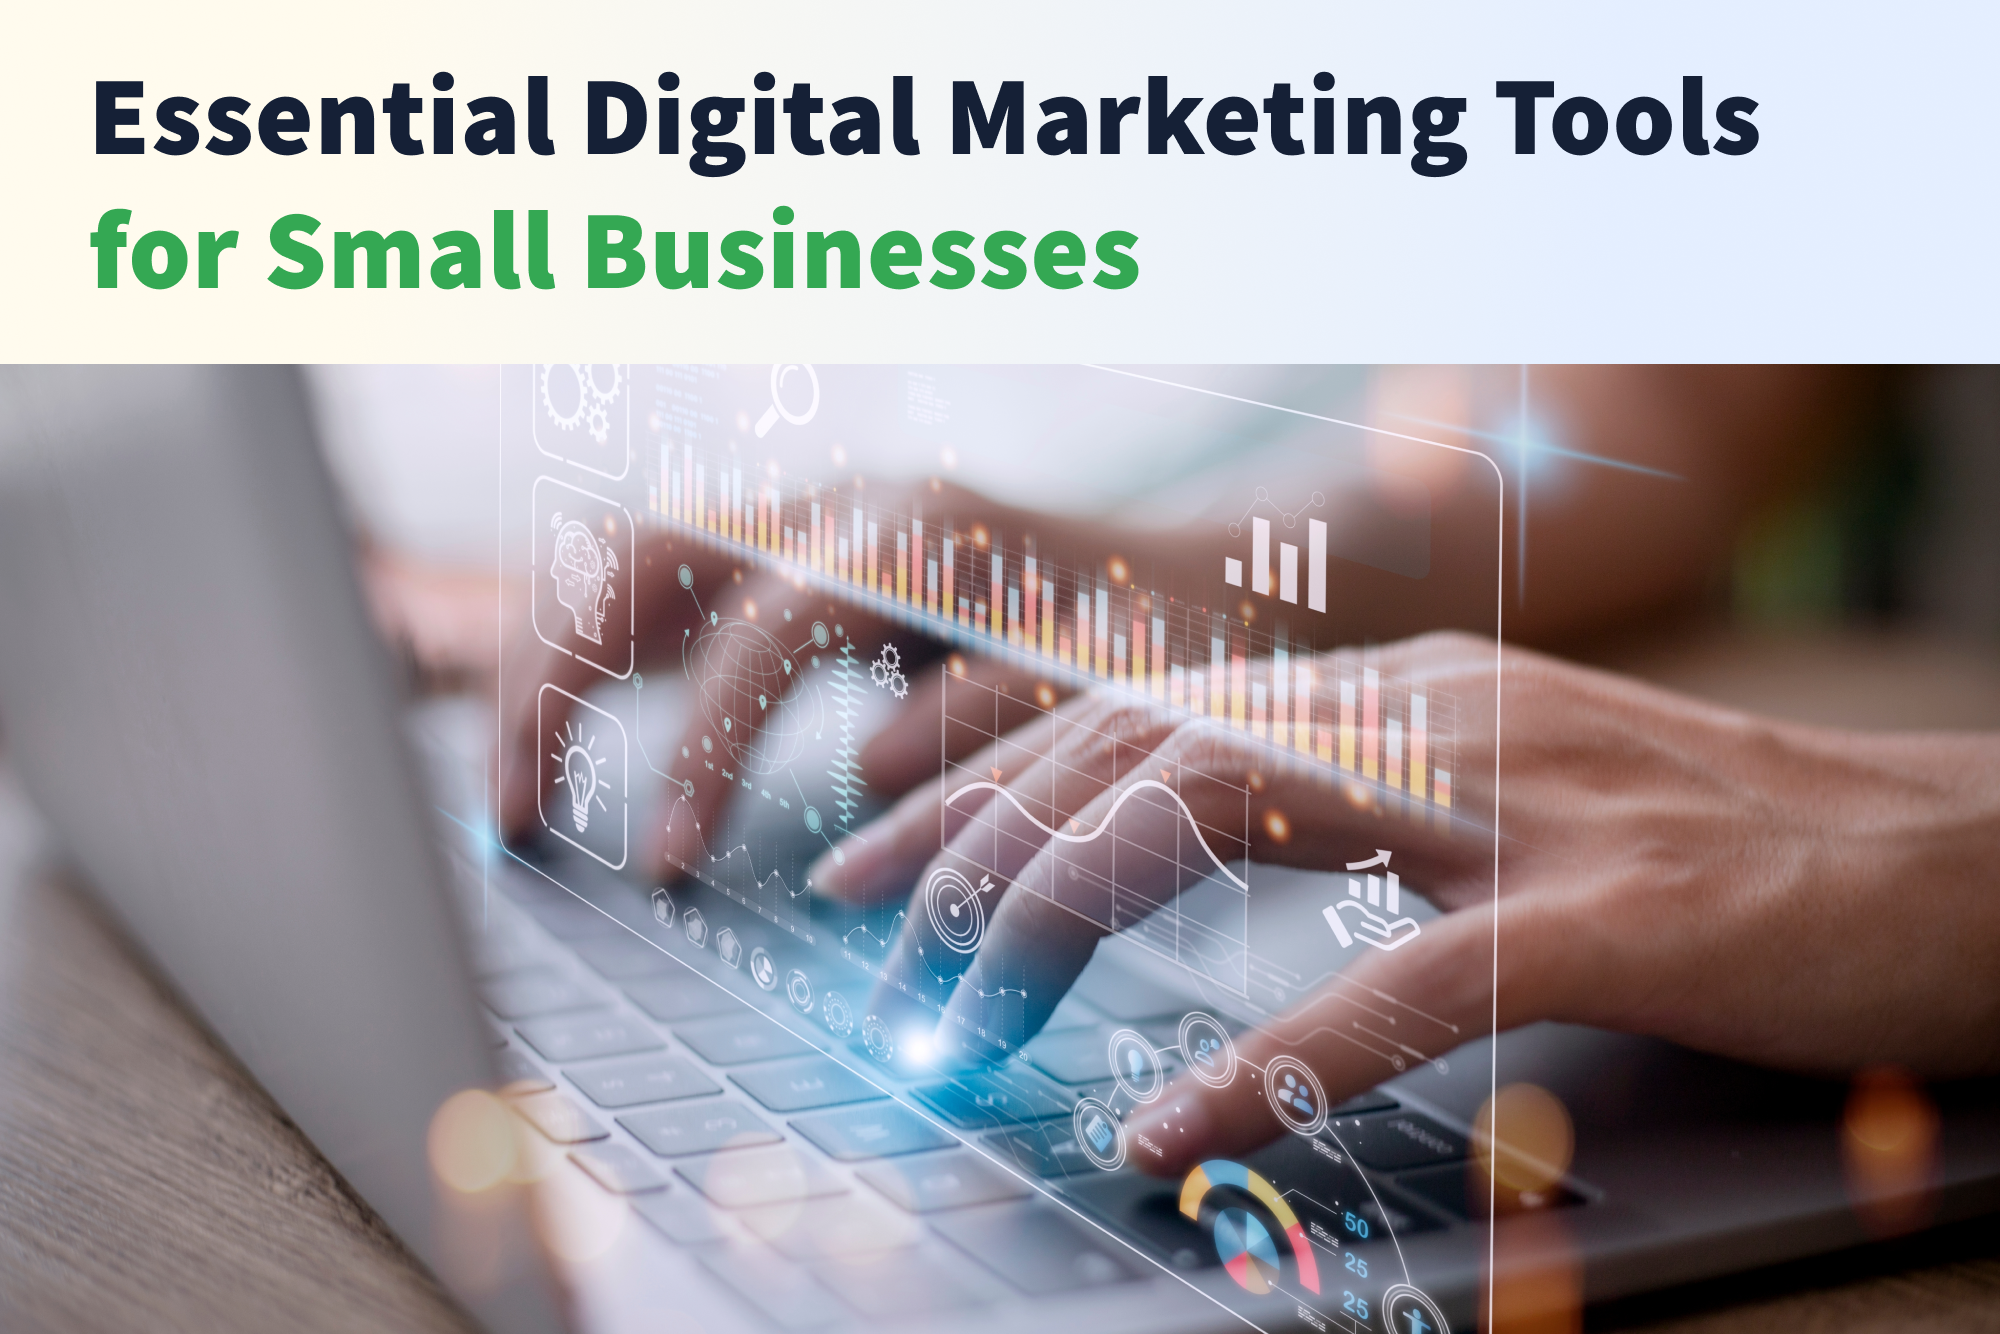 10 Essential Digital Marketing Tools for Small Businesses